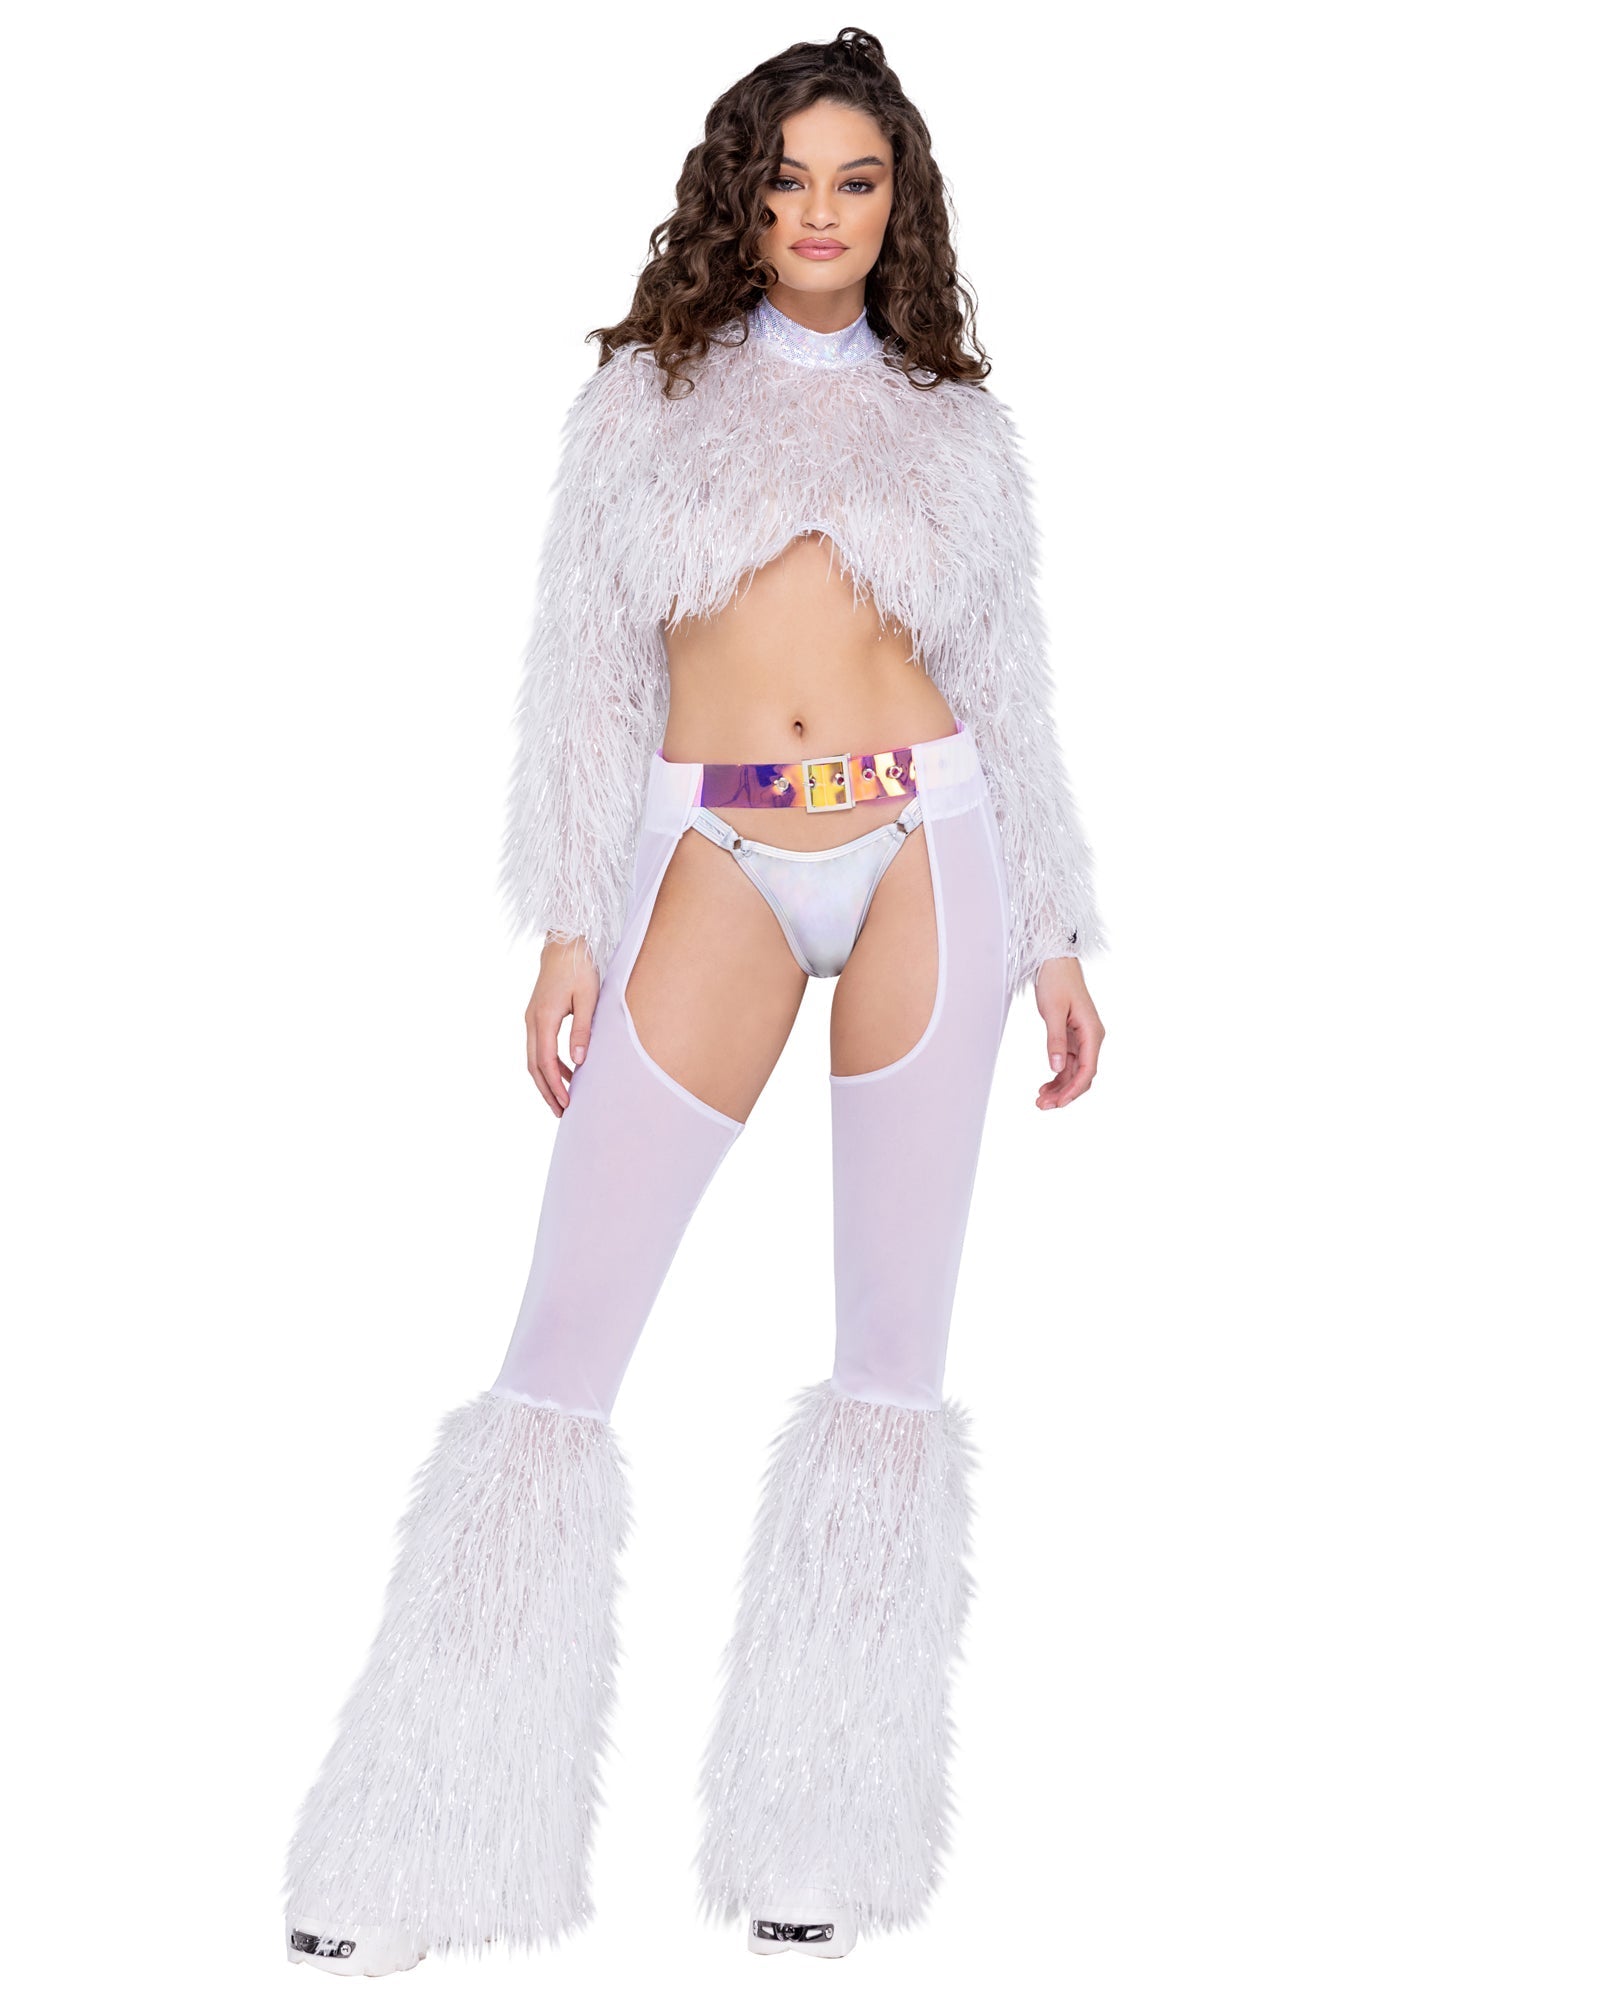 6248 - Sheer Chaps with Faux Fur Bell & Belt Eye Candy Sensation